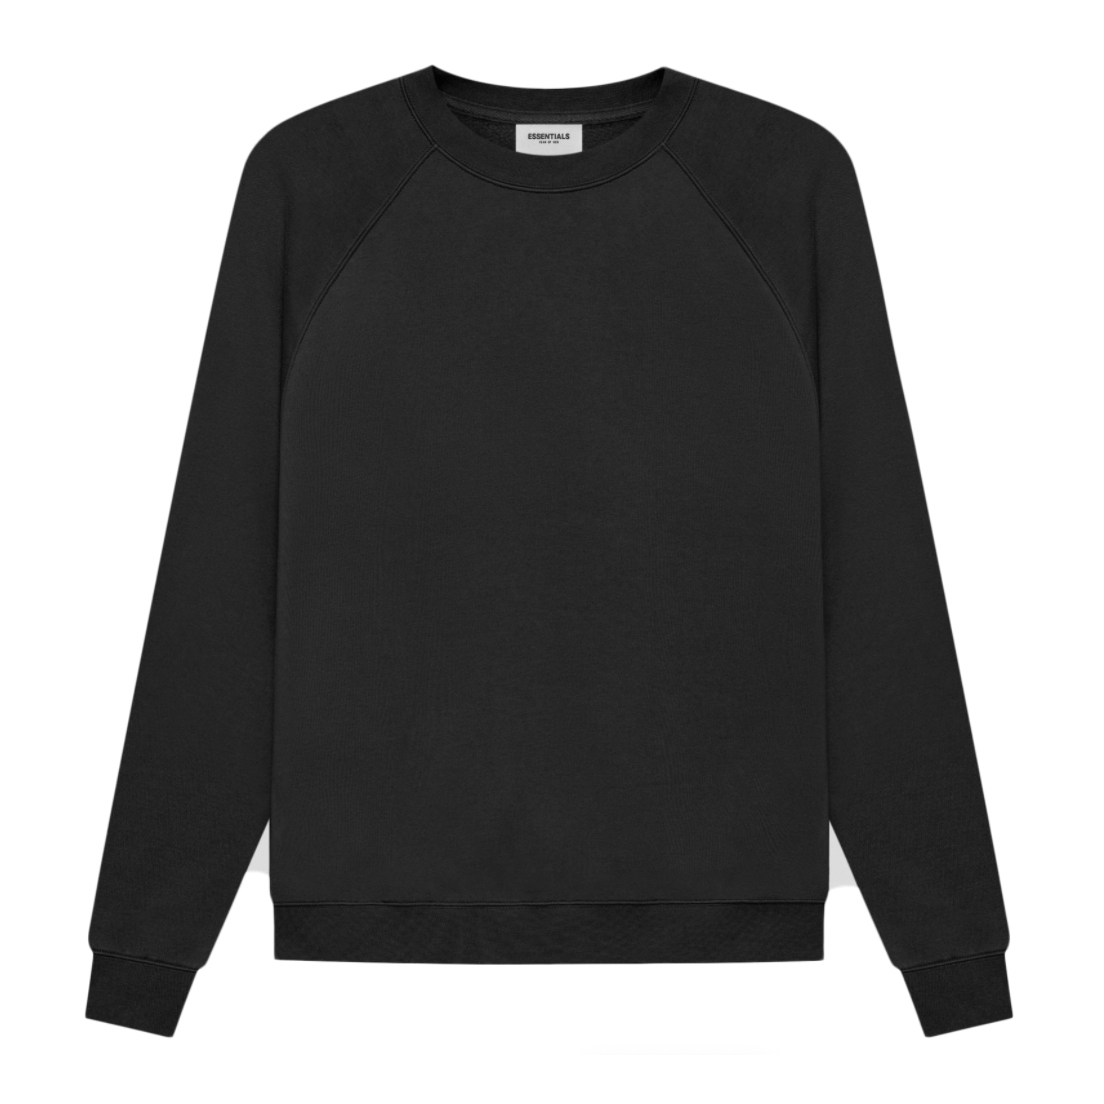 FEAR OF GOD ESSENTIALS Pull-Over Crewneck Black/Stretch Limo